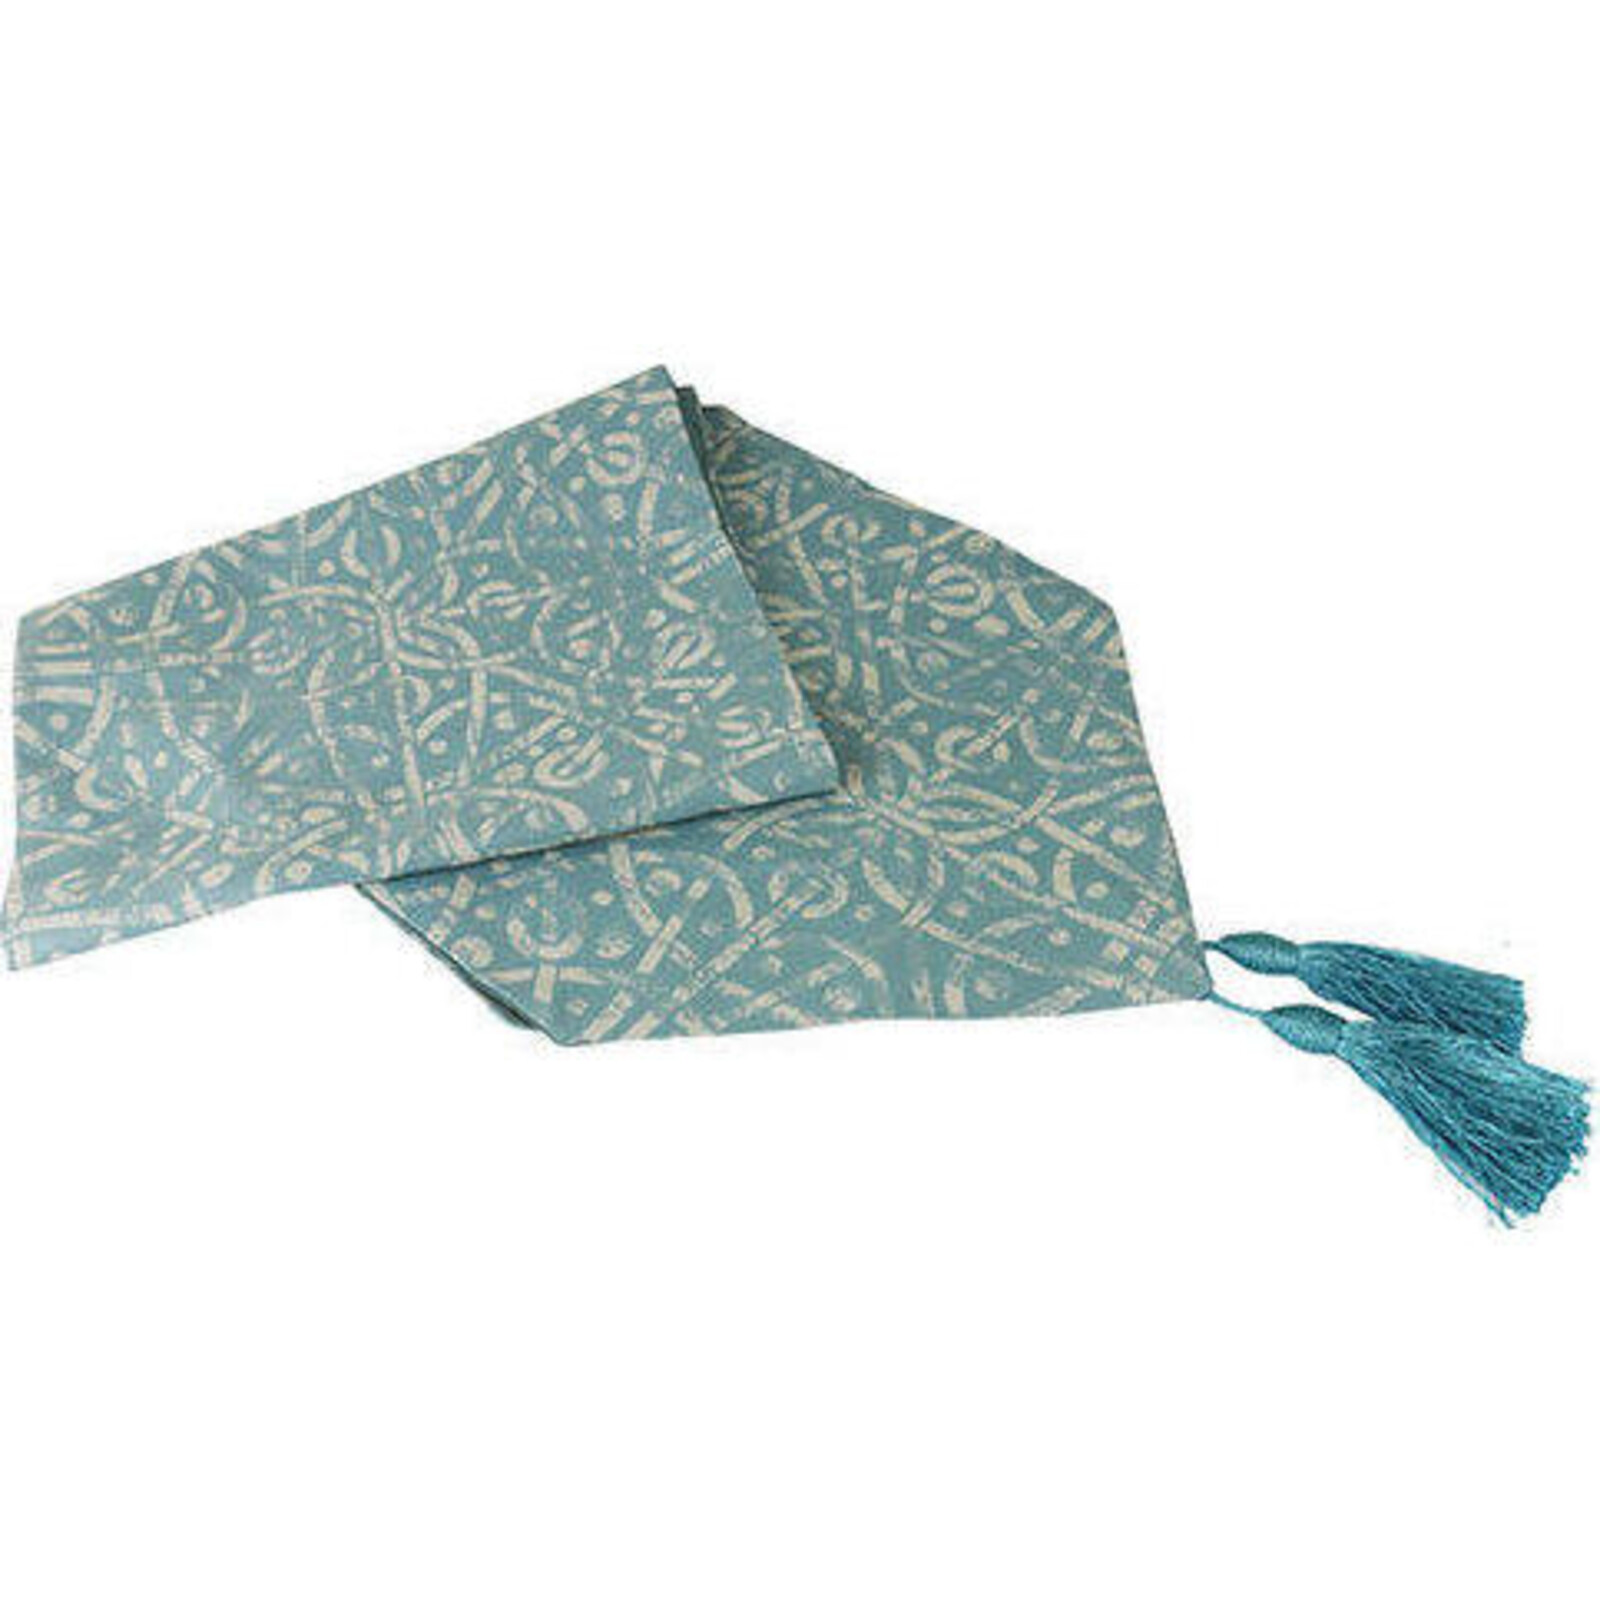 Table Runner Rubbed Pattern Blue